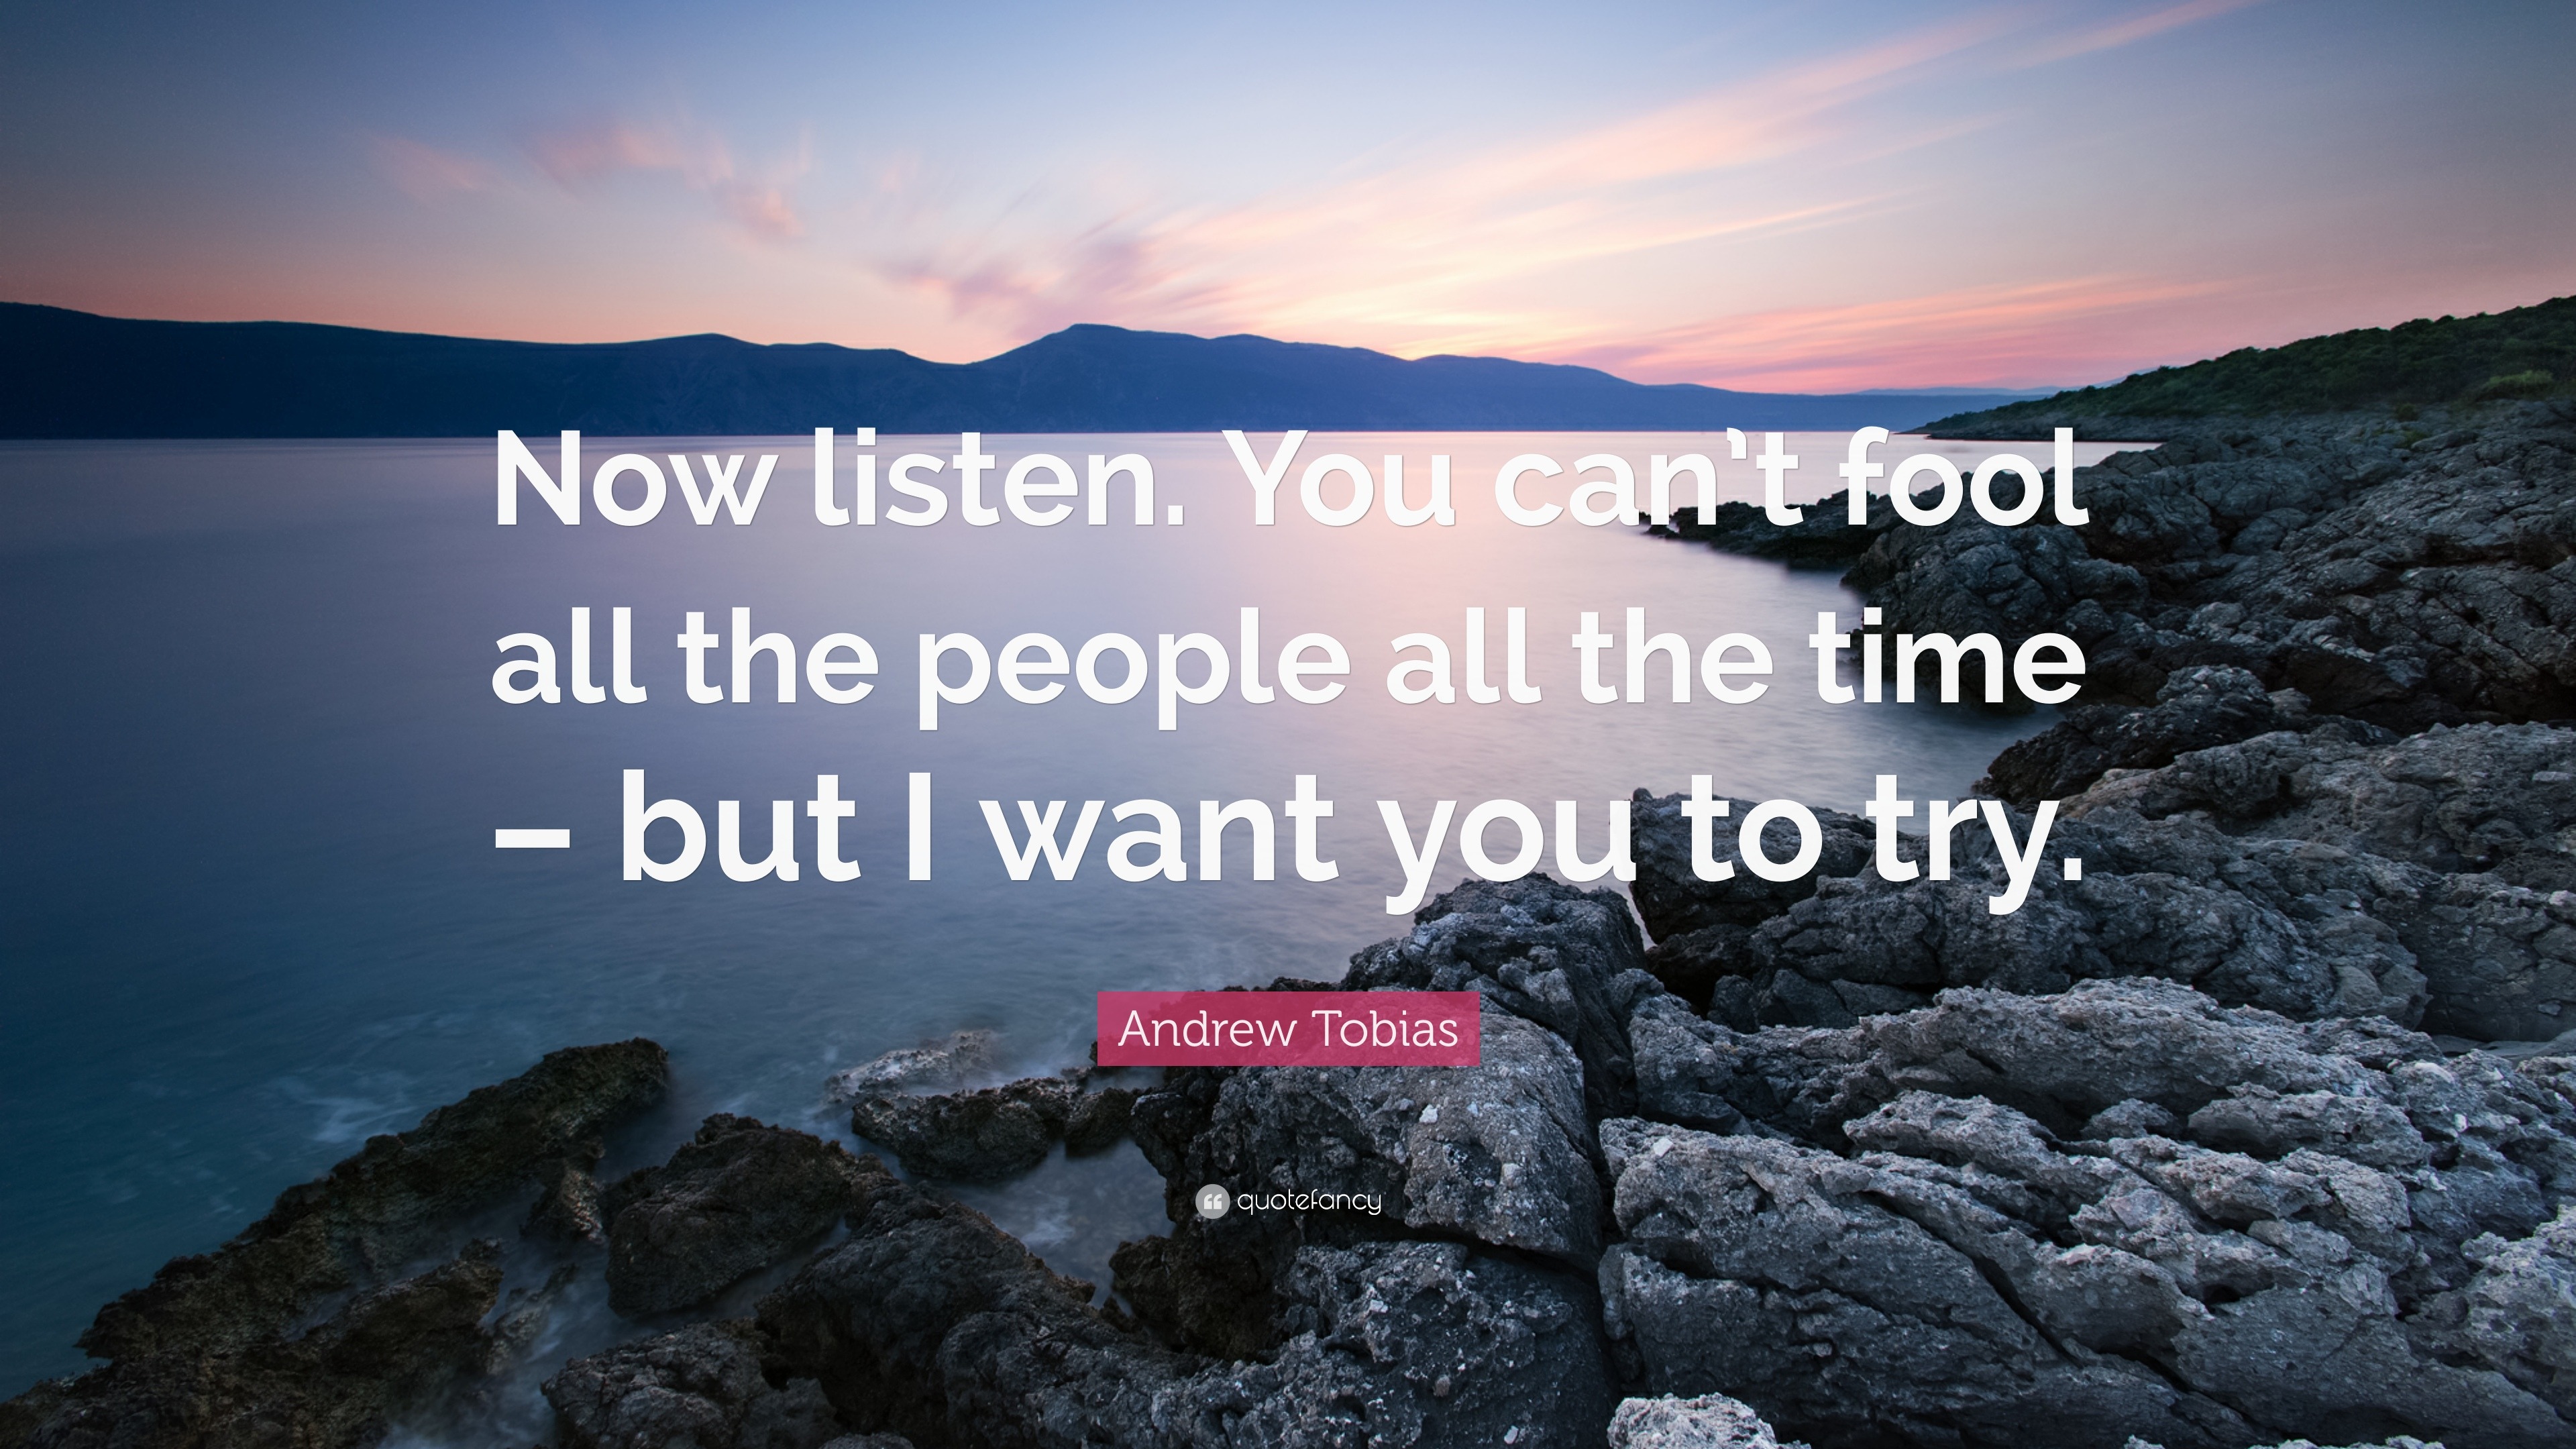 Andrew Tobias Quote: “Now listen. You can’t fool all the people all the ...